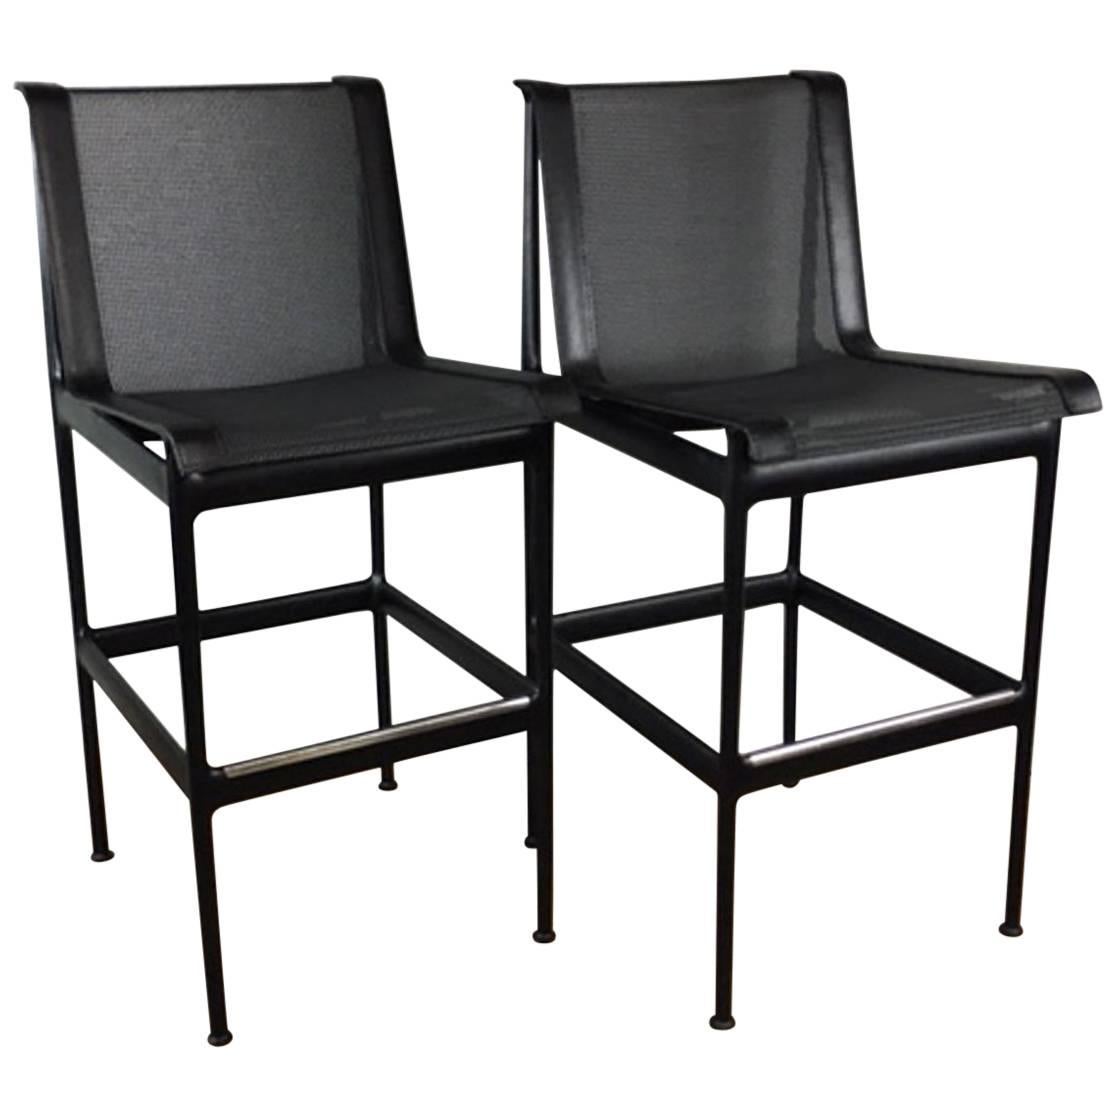 Richard Schultz Bar Stools or Chairs For Sale